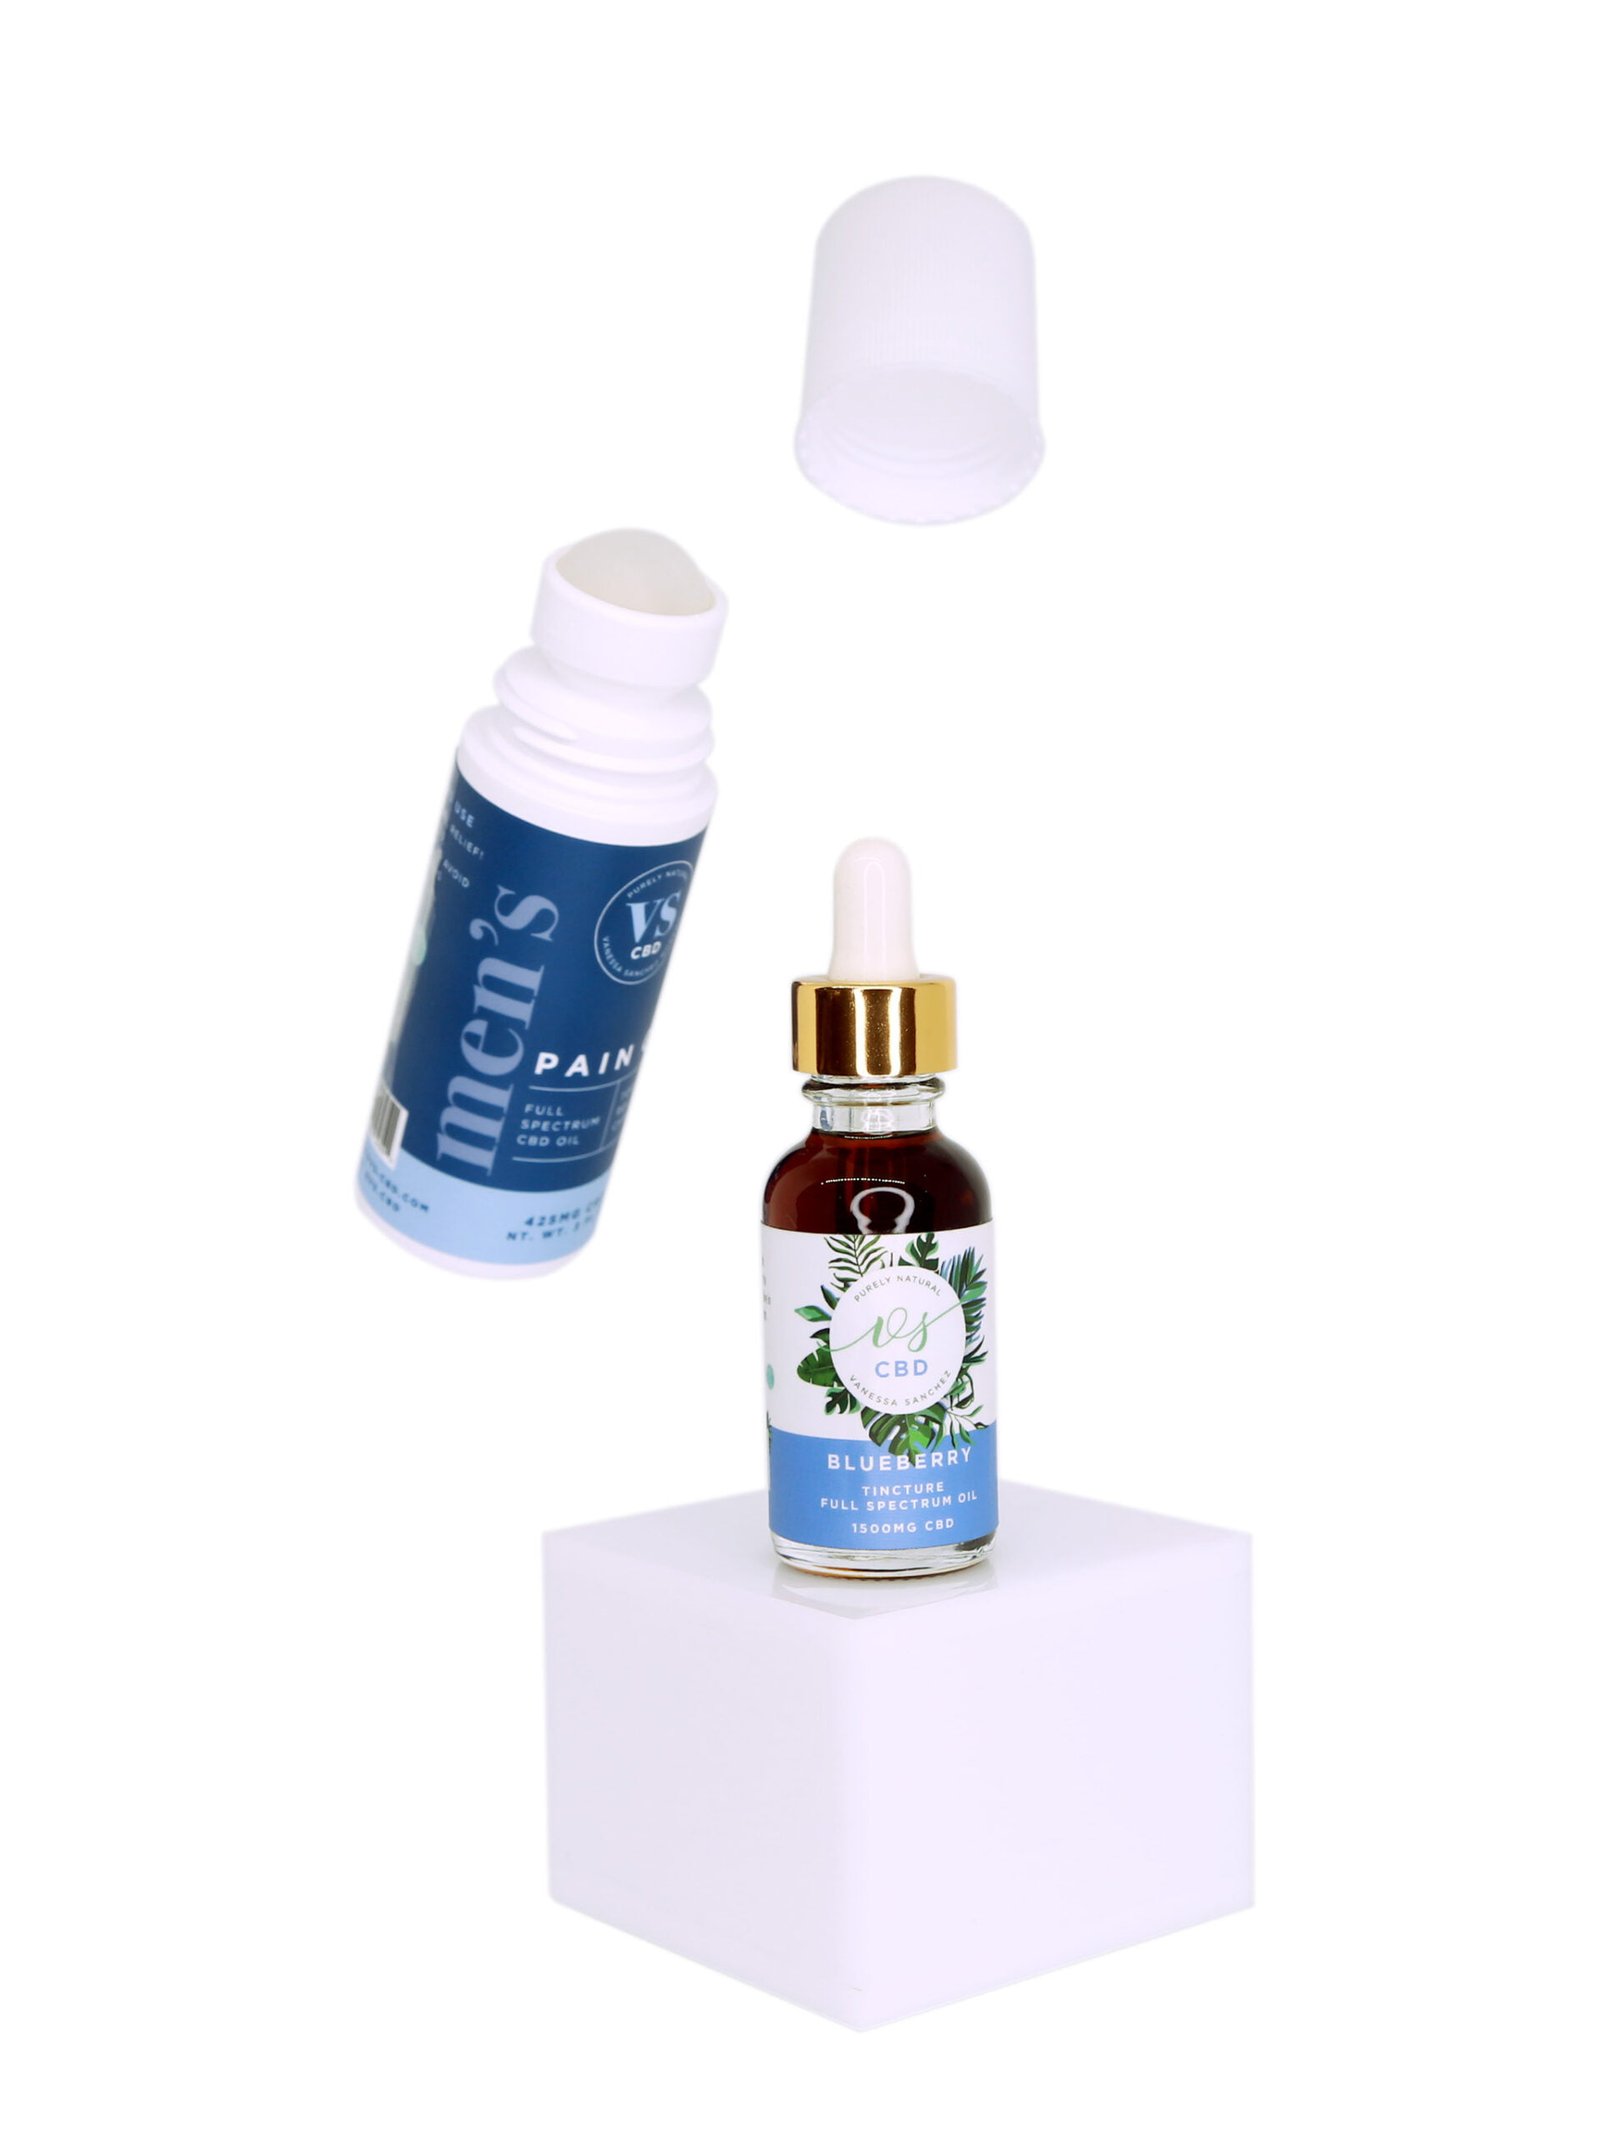 NEW Pain gel & tincture floating 1